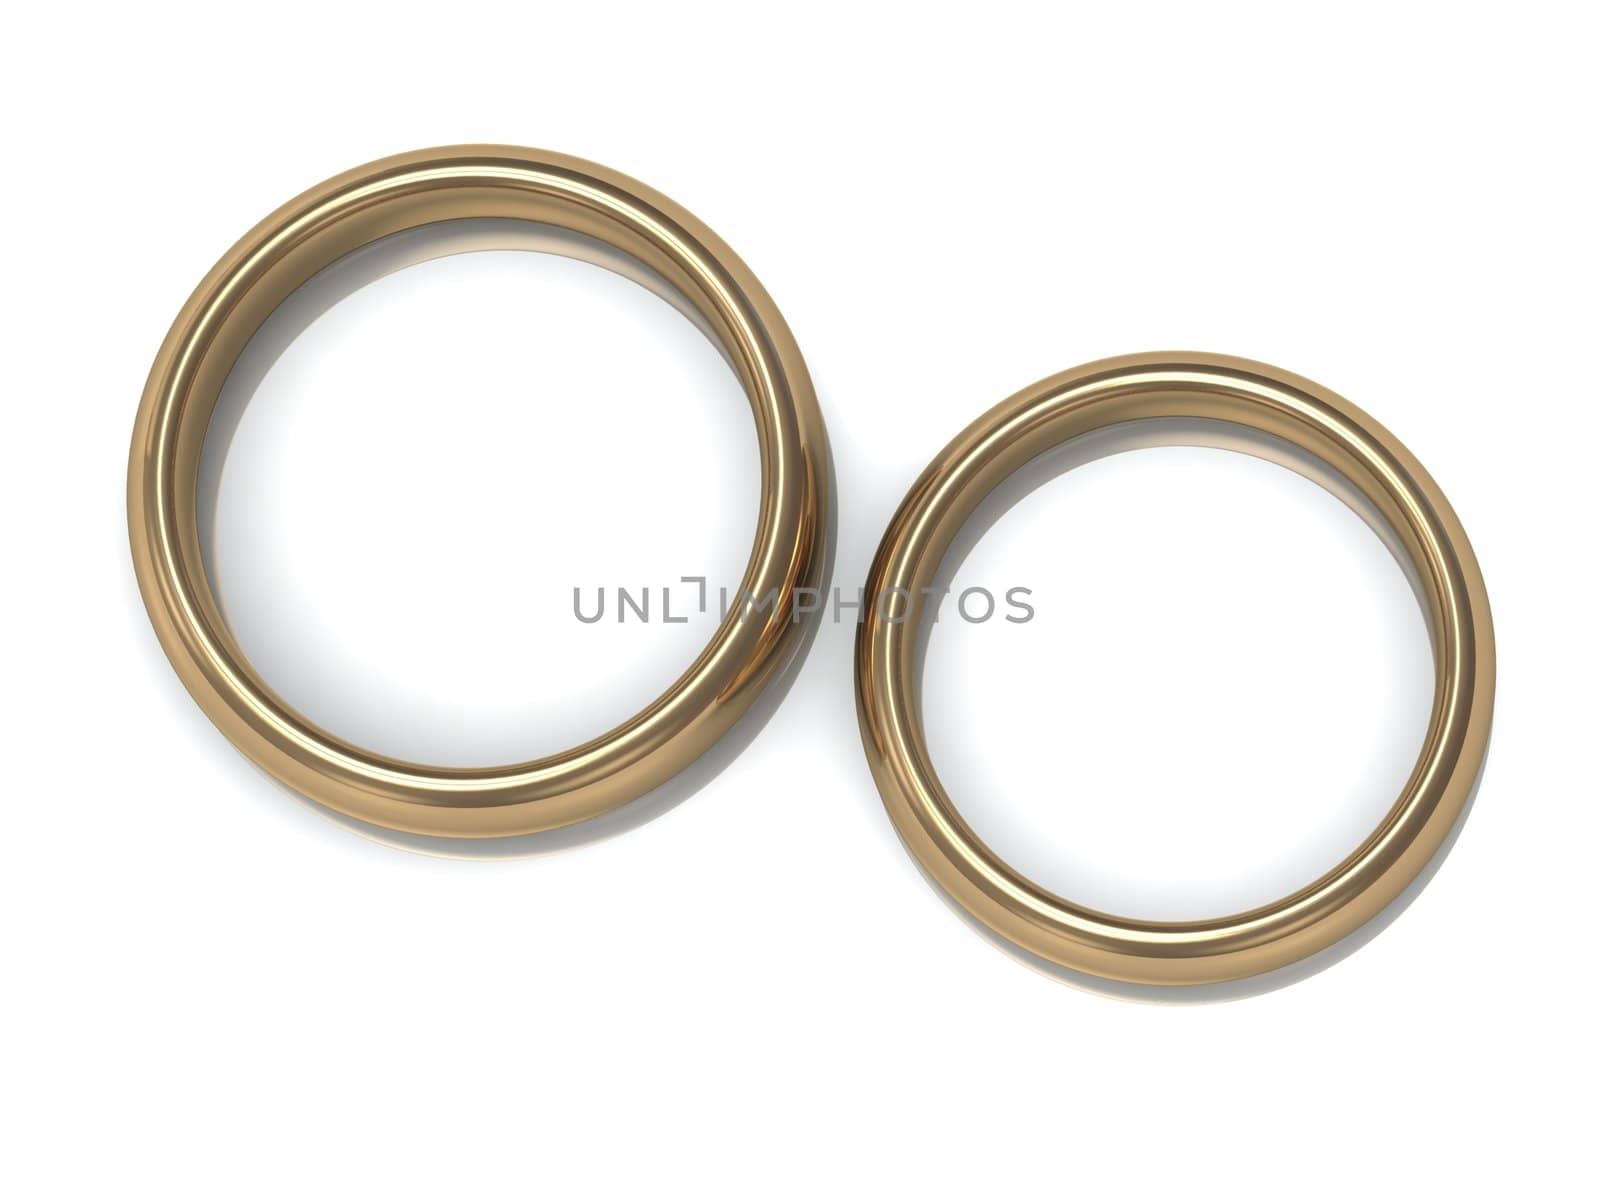 Two wedding rings on the top view of a white background